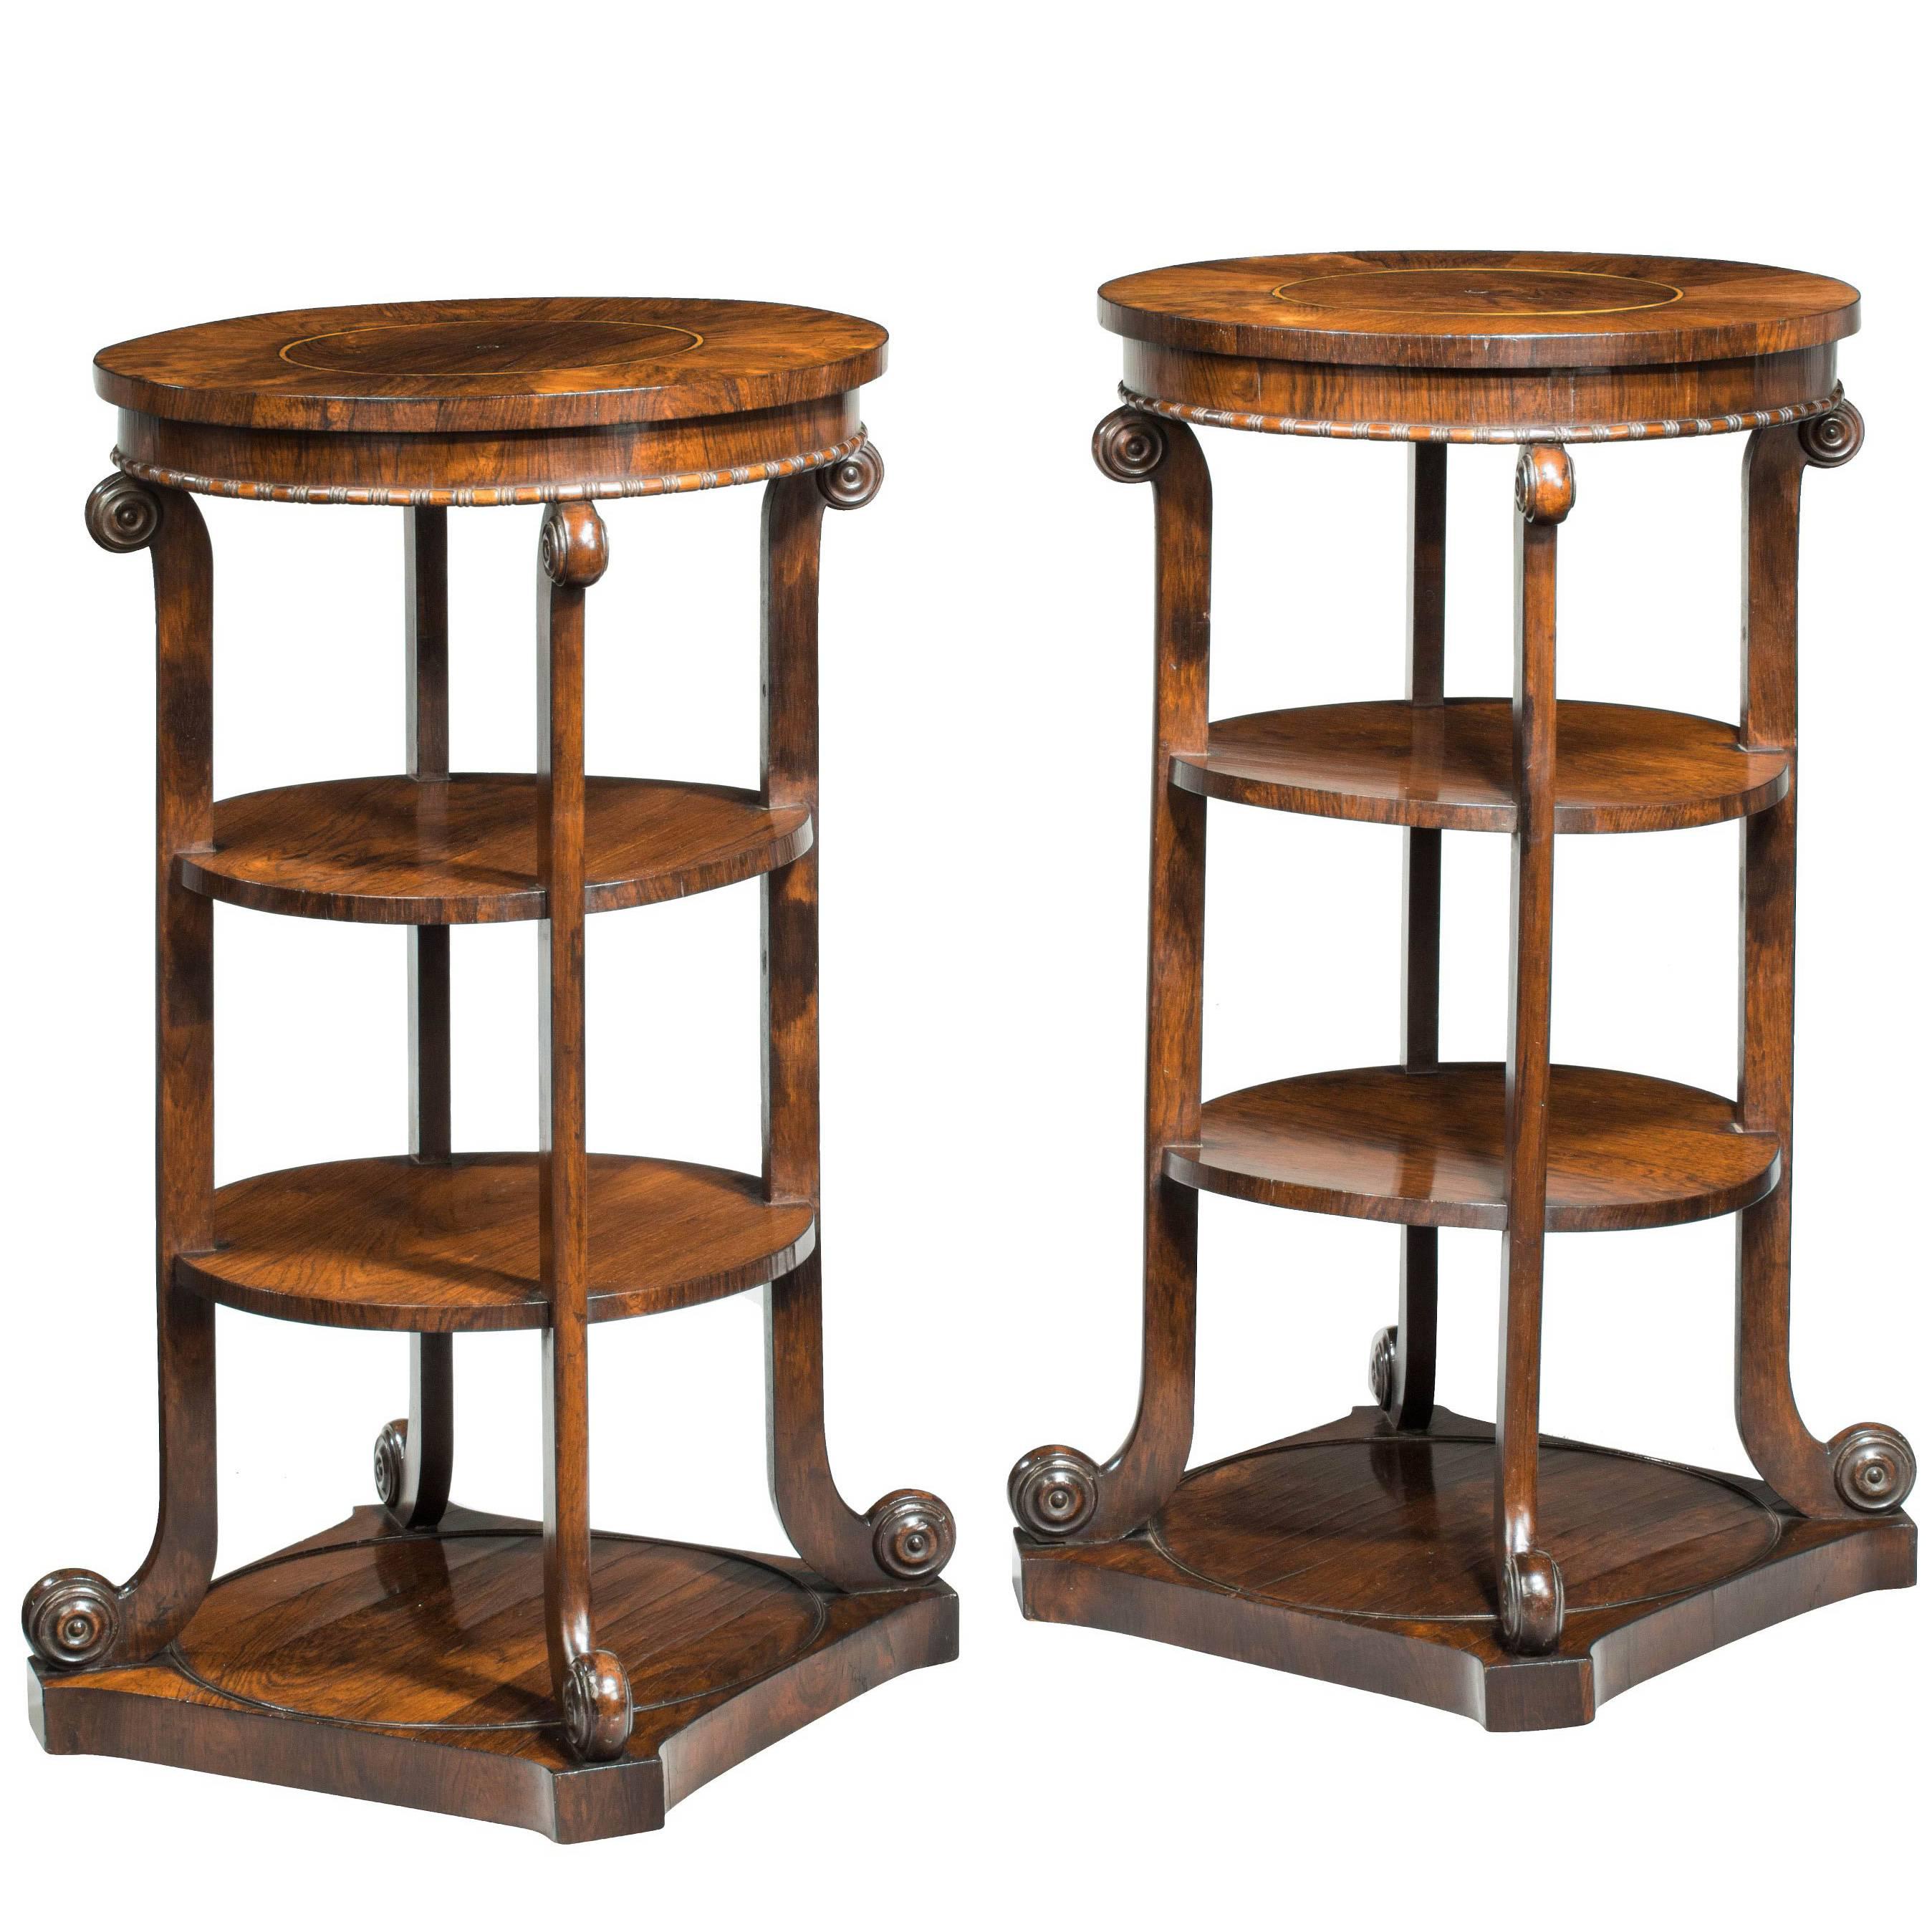 Pair of Regency Period Mahogany Etageres of Finely Figured Timbers